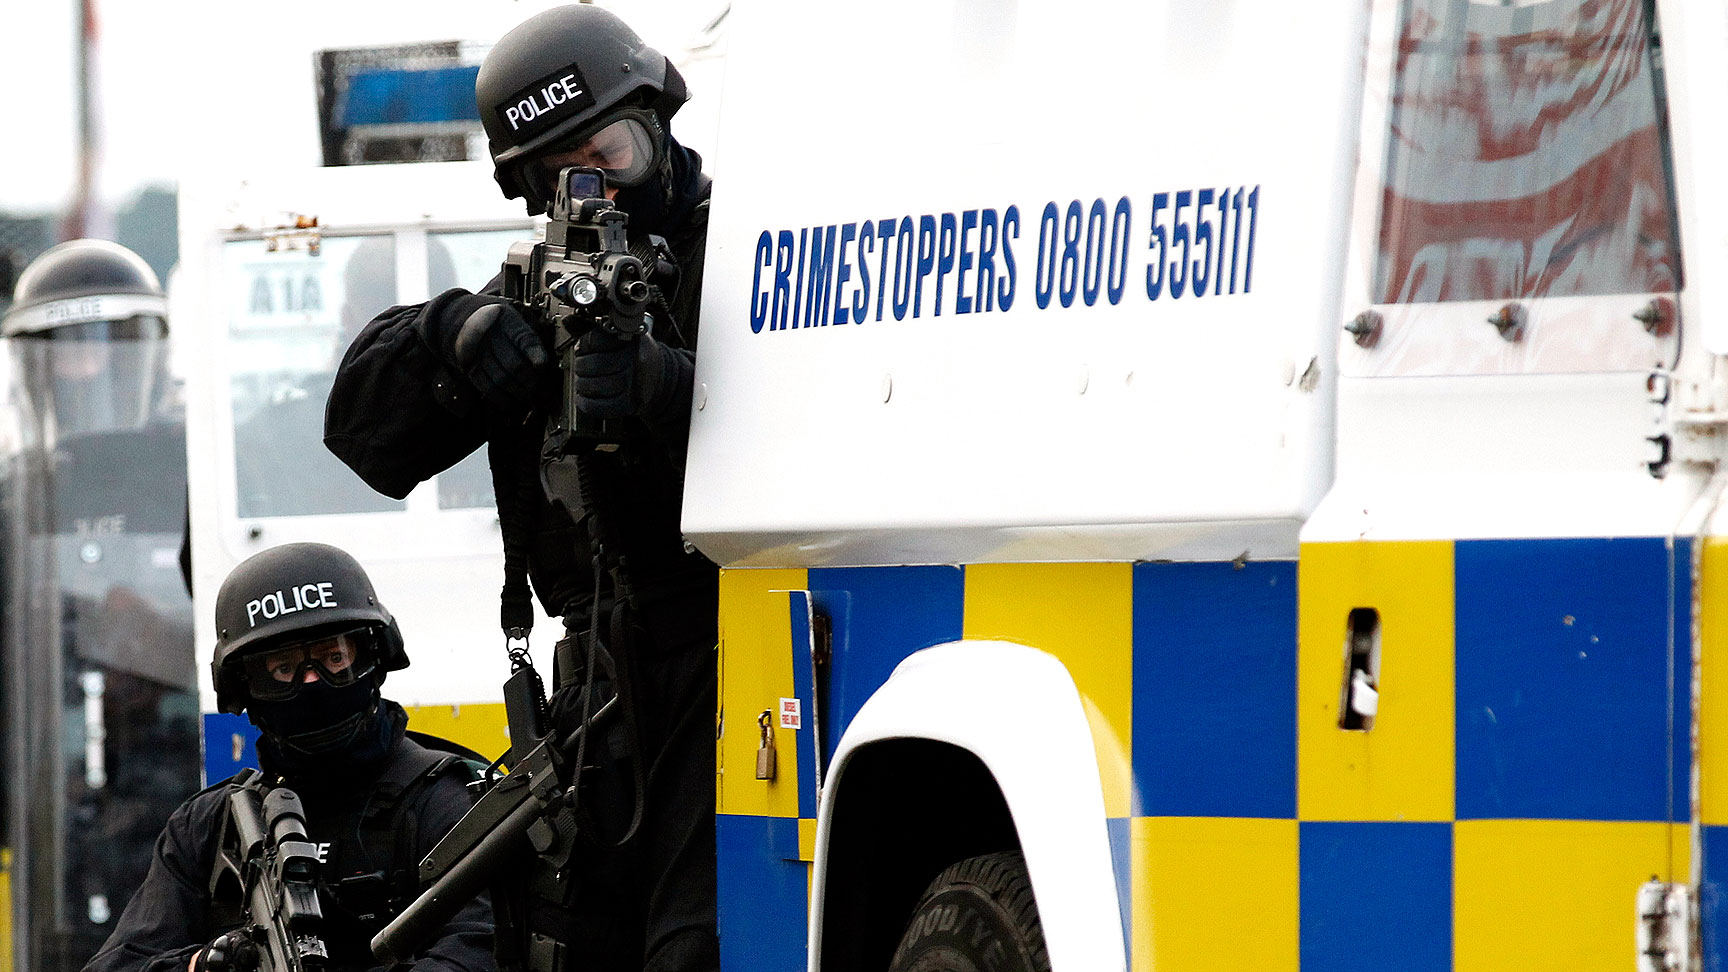 PSNI accused of 'political' policing over IRA charges